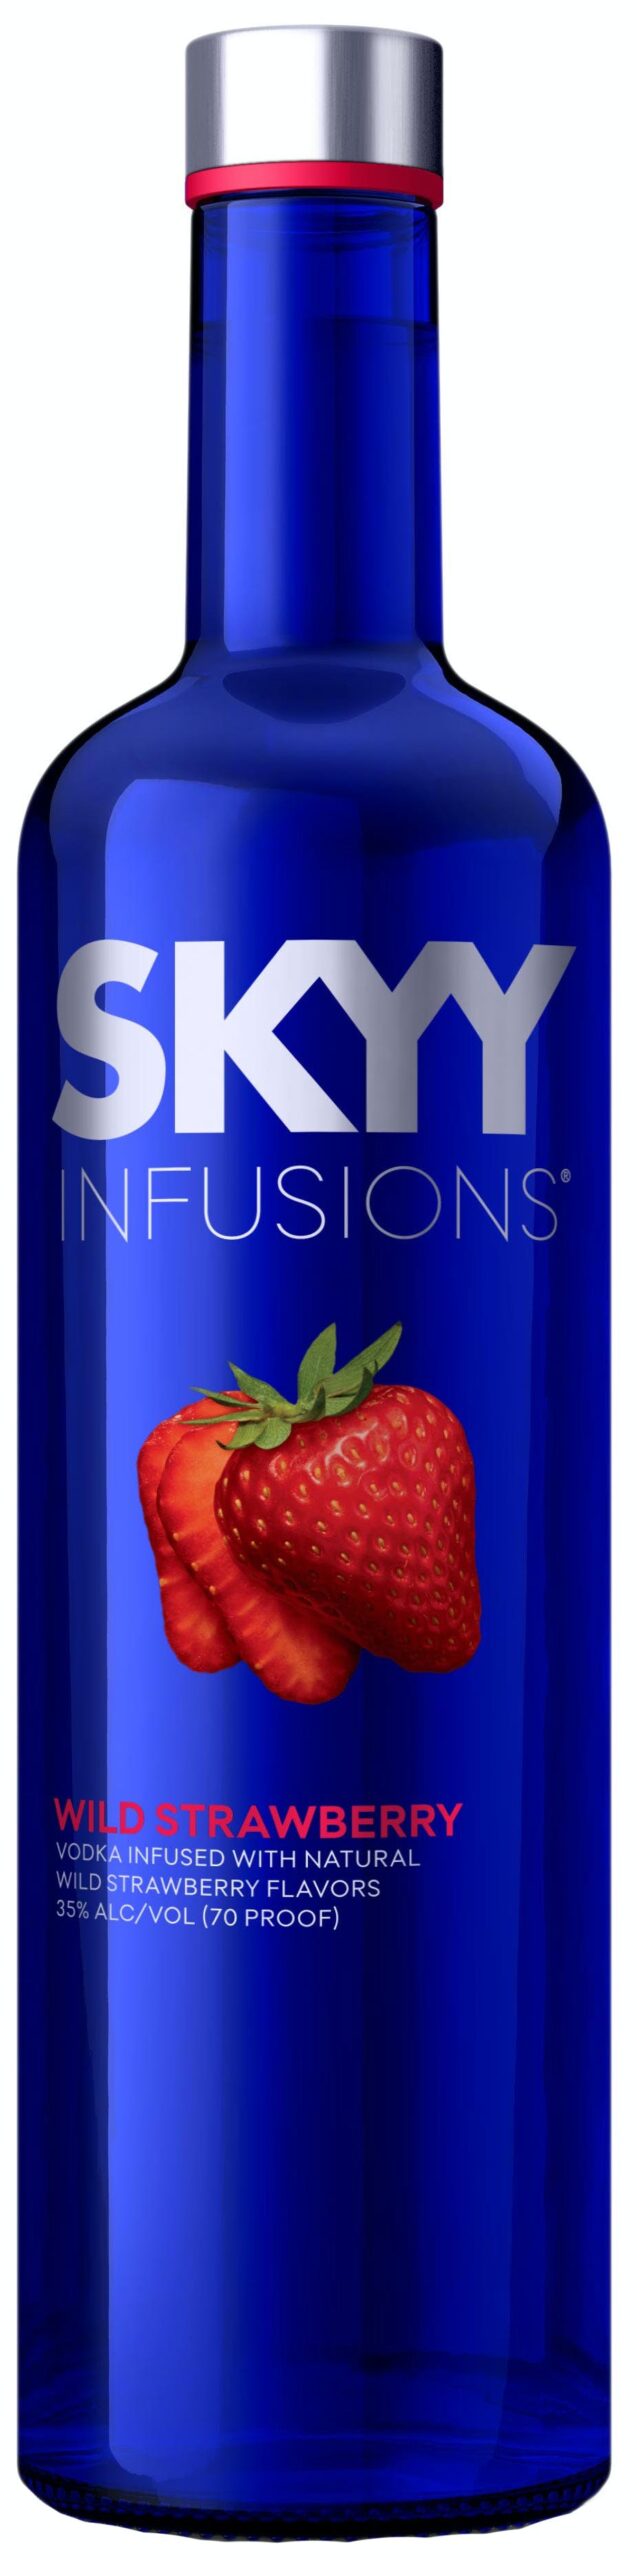 Skyy Infusions Wild Strawberry Water